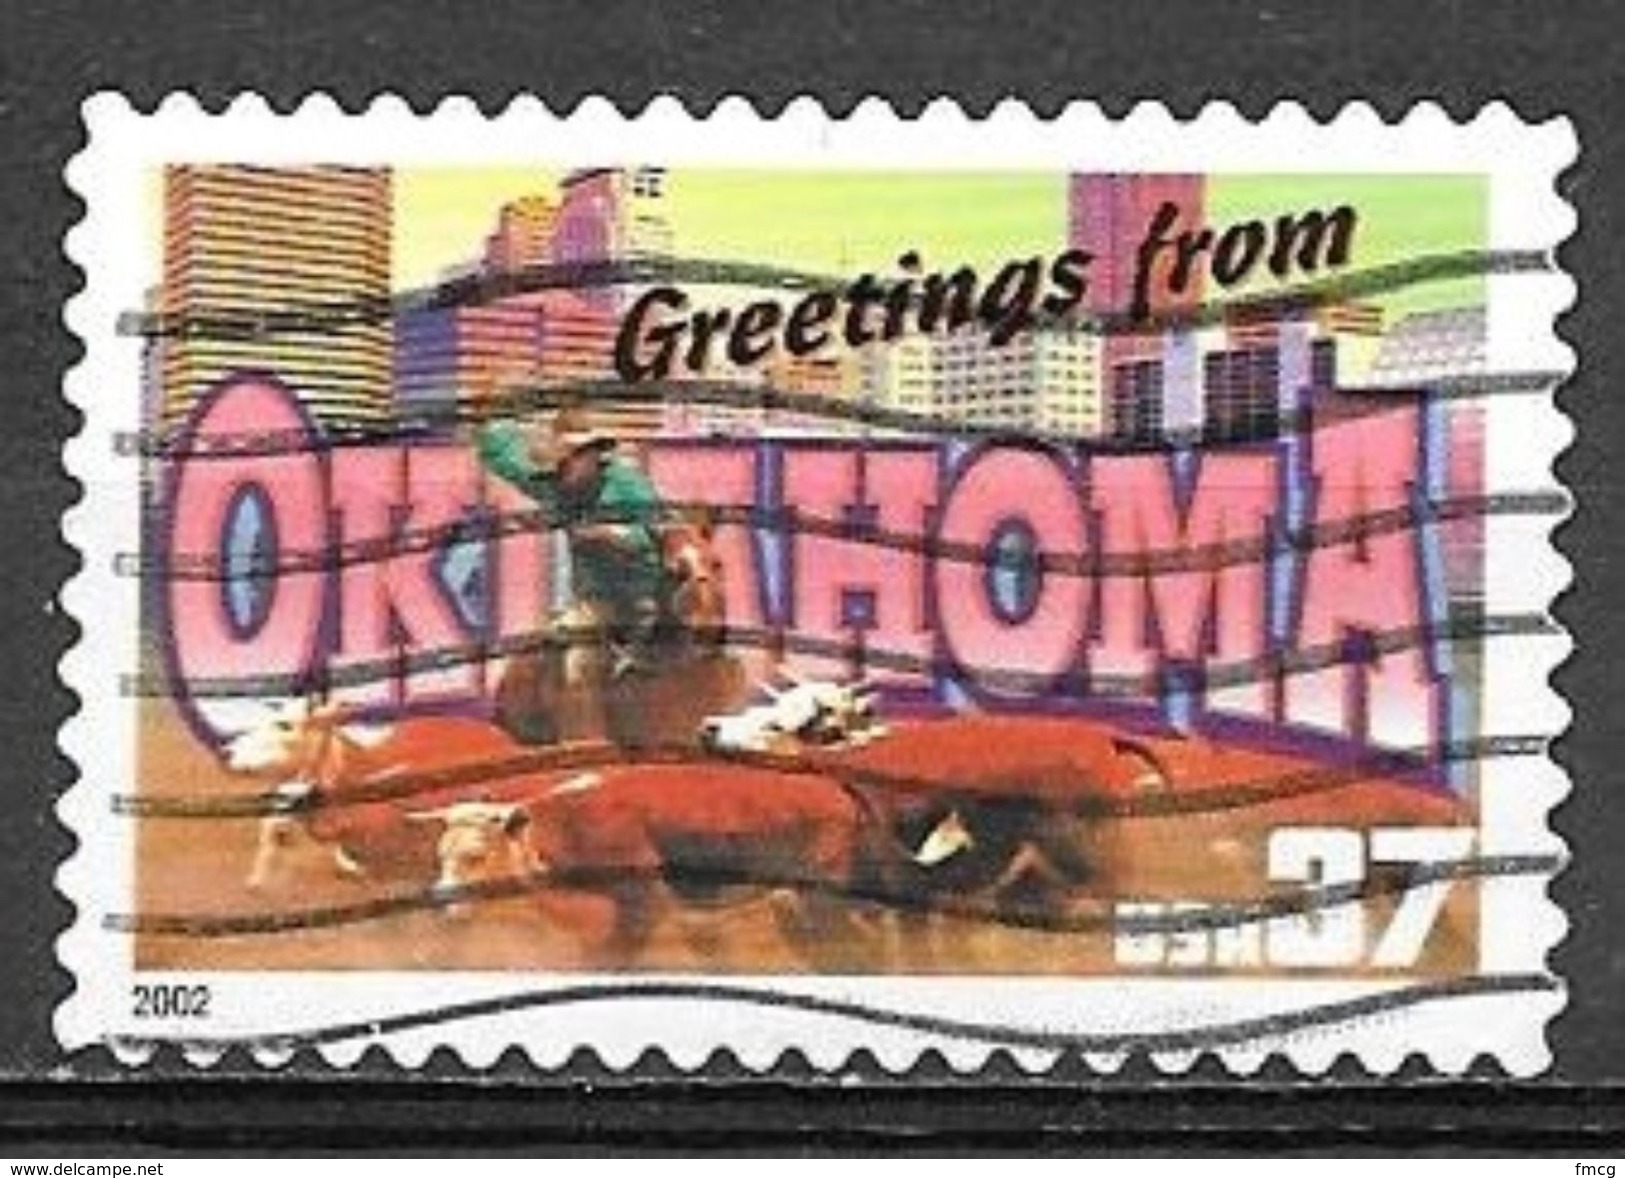 2002 37 Cents State Greetings, Oklahoma, Used - Used Stamps